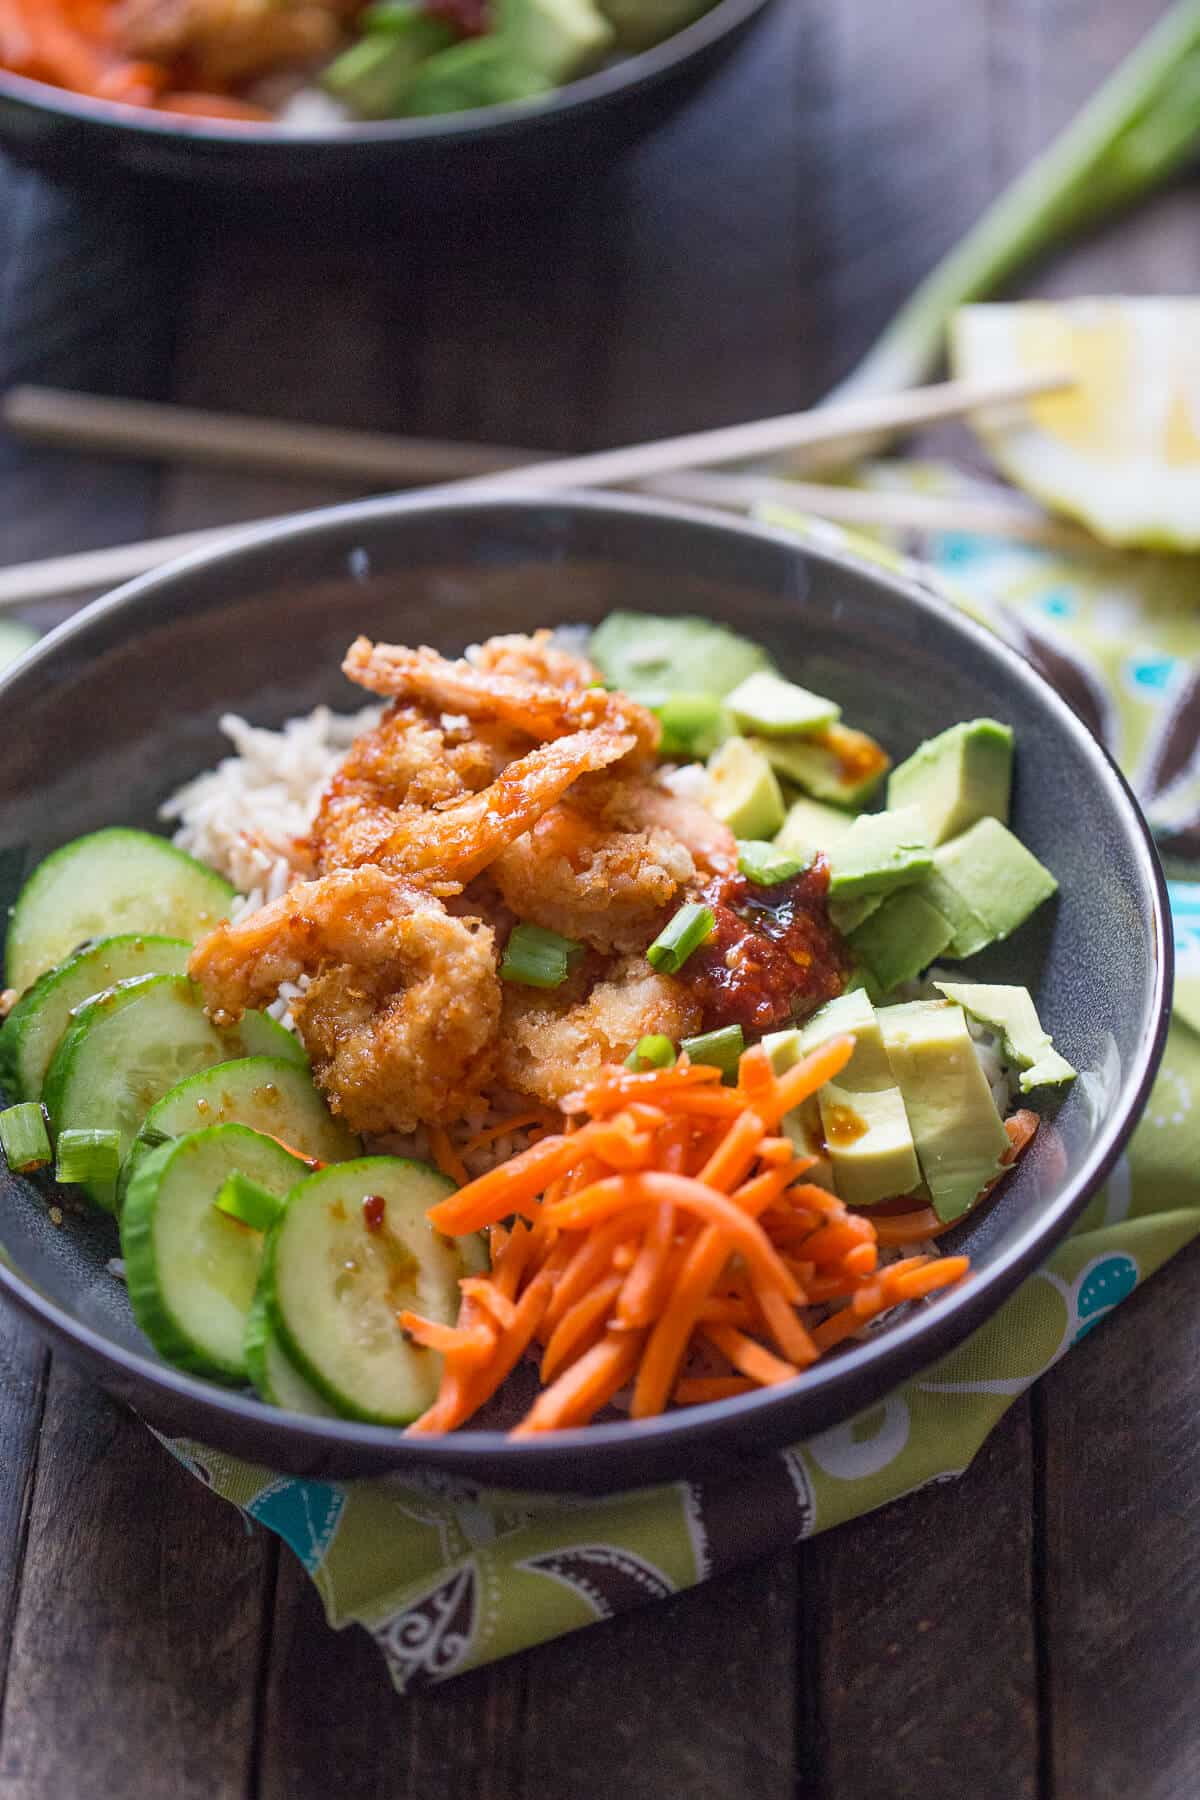 This breaded sushi bowl is perfect for when you crave sushi but don’t want to dine out!